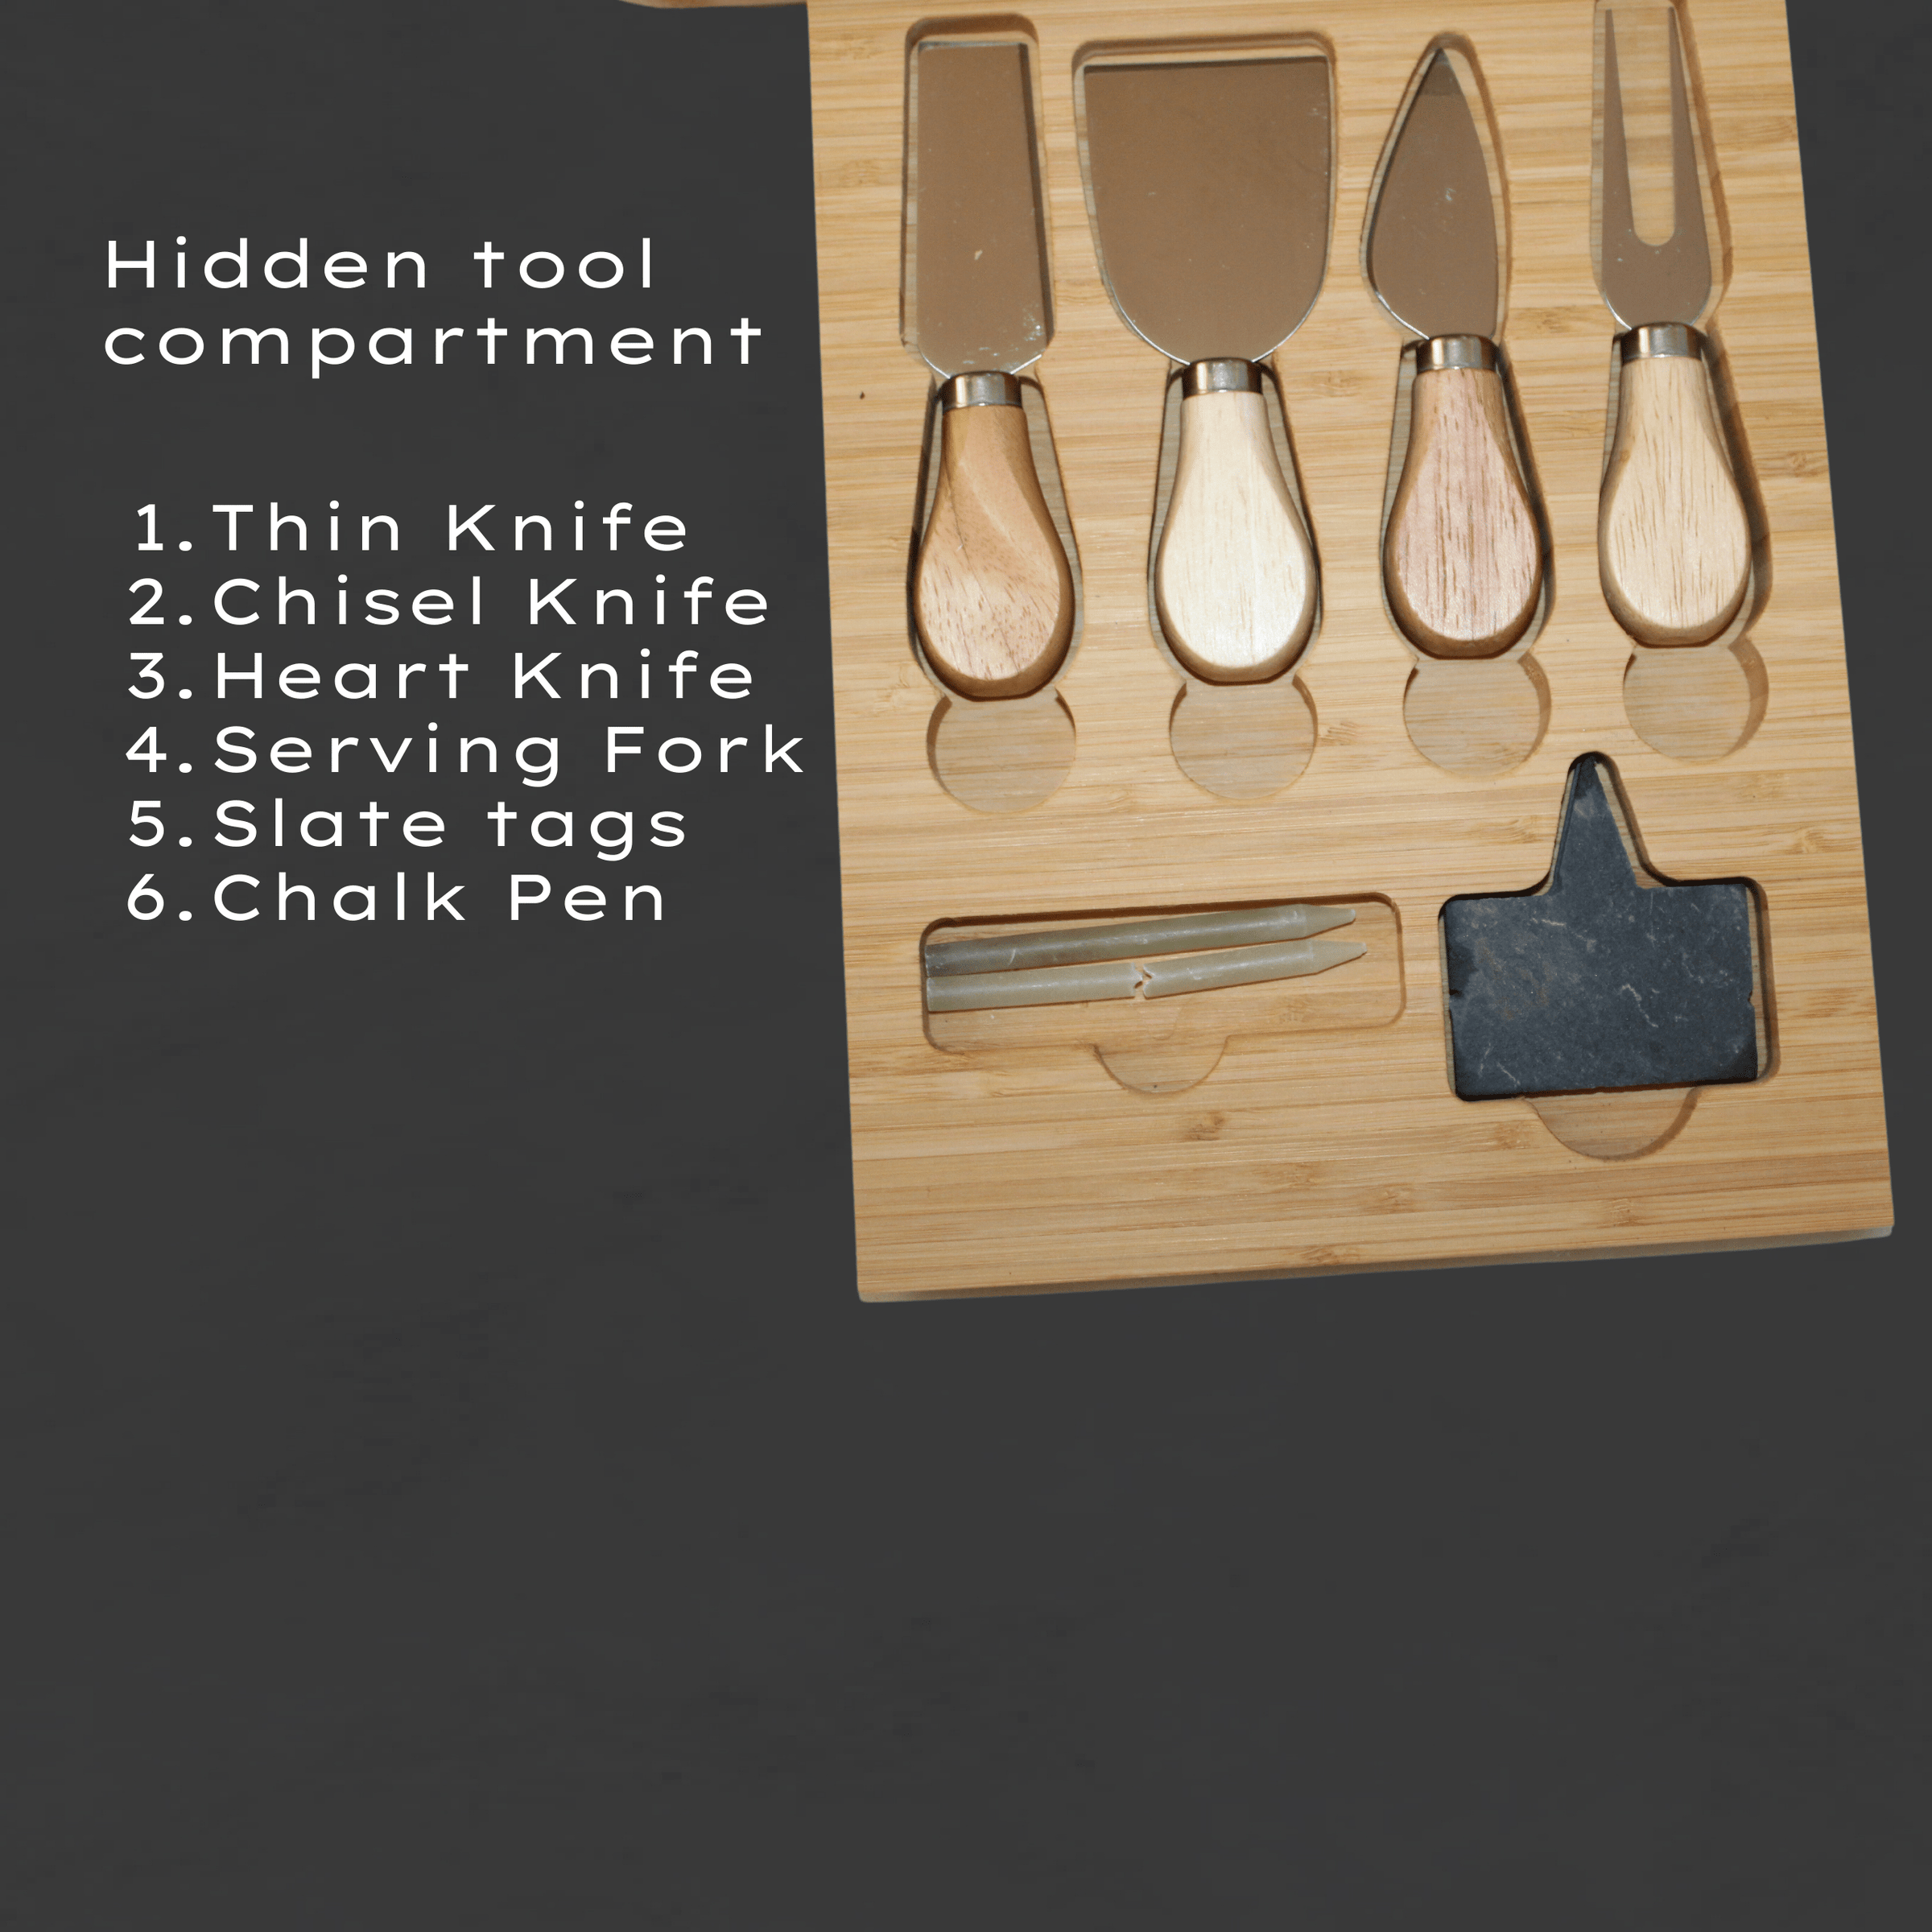 Thoughtfol Charcuterie Sets Thoughtfol Compact Bamboo Cheese Board Set | Charcuterie and Pairing Guide | Large Wooden Board | Unique Housewarming Gift | Perfect for Appetizers, Cheese Platters, Meat and Cheese Trays | Wood Serving Board | The Ultimate Gift for Food Enthusiasts!